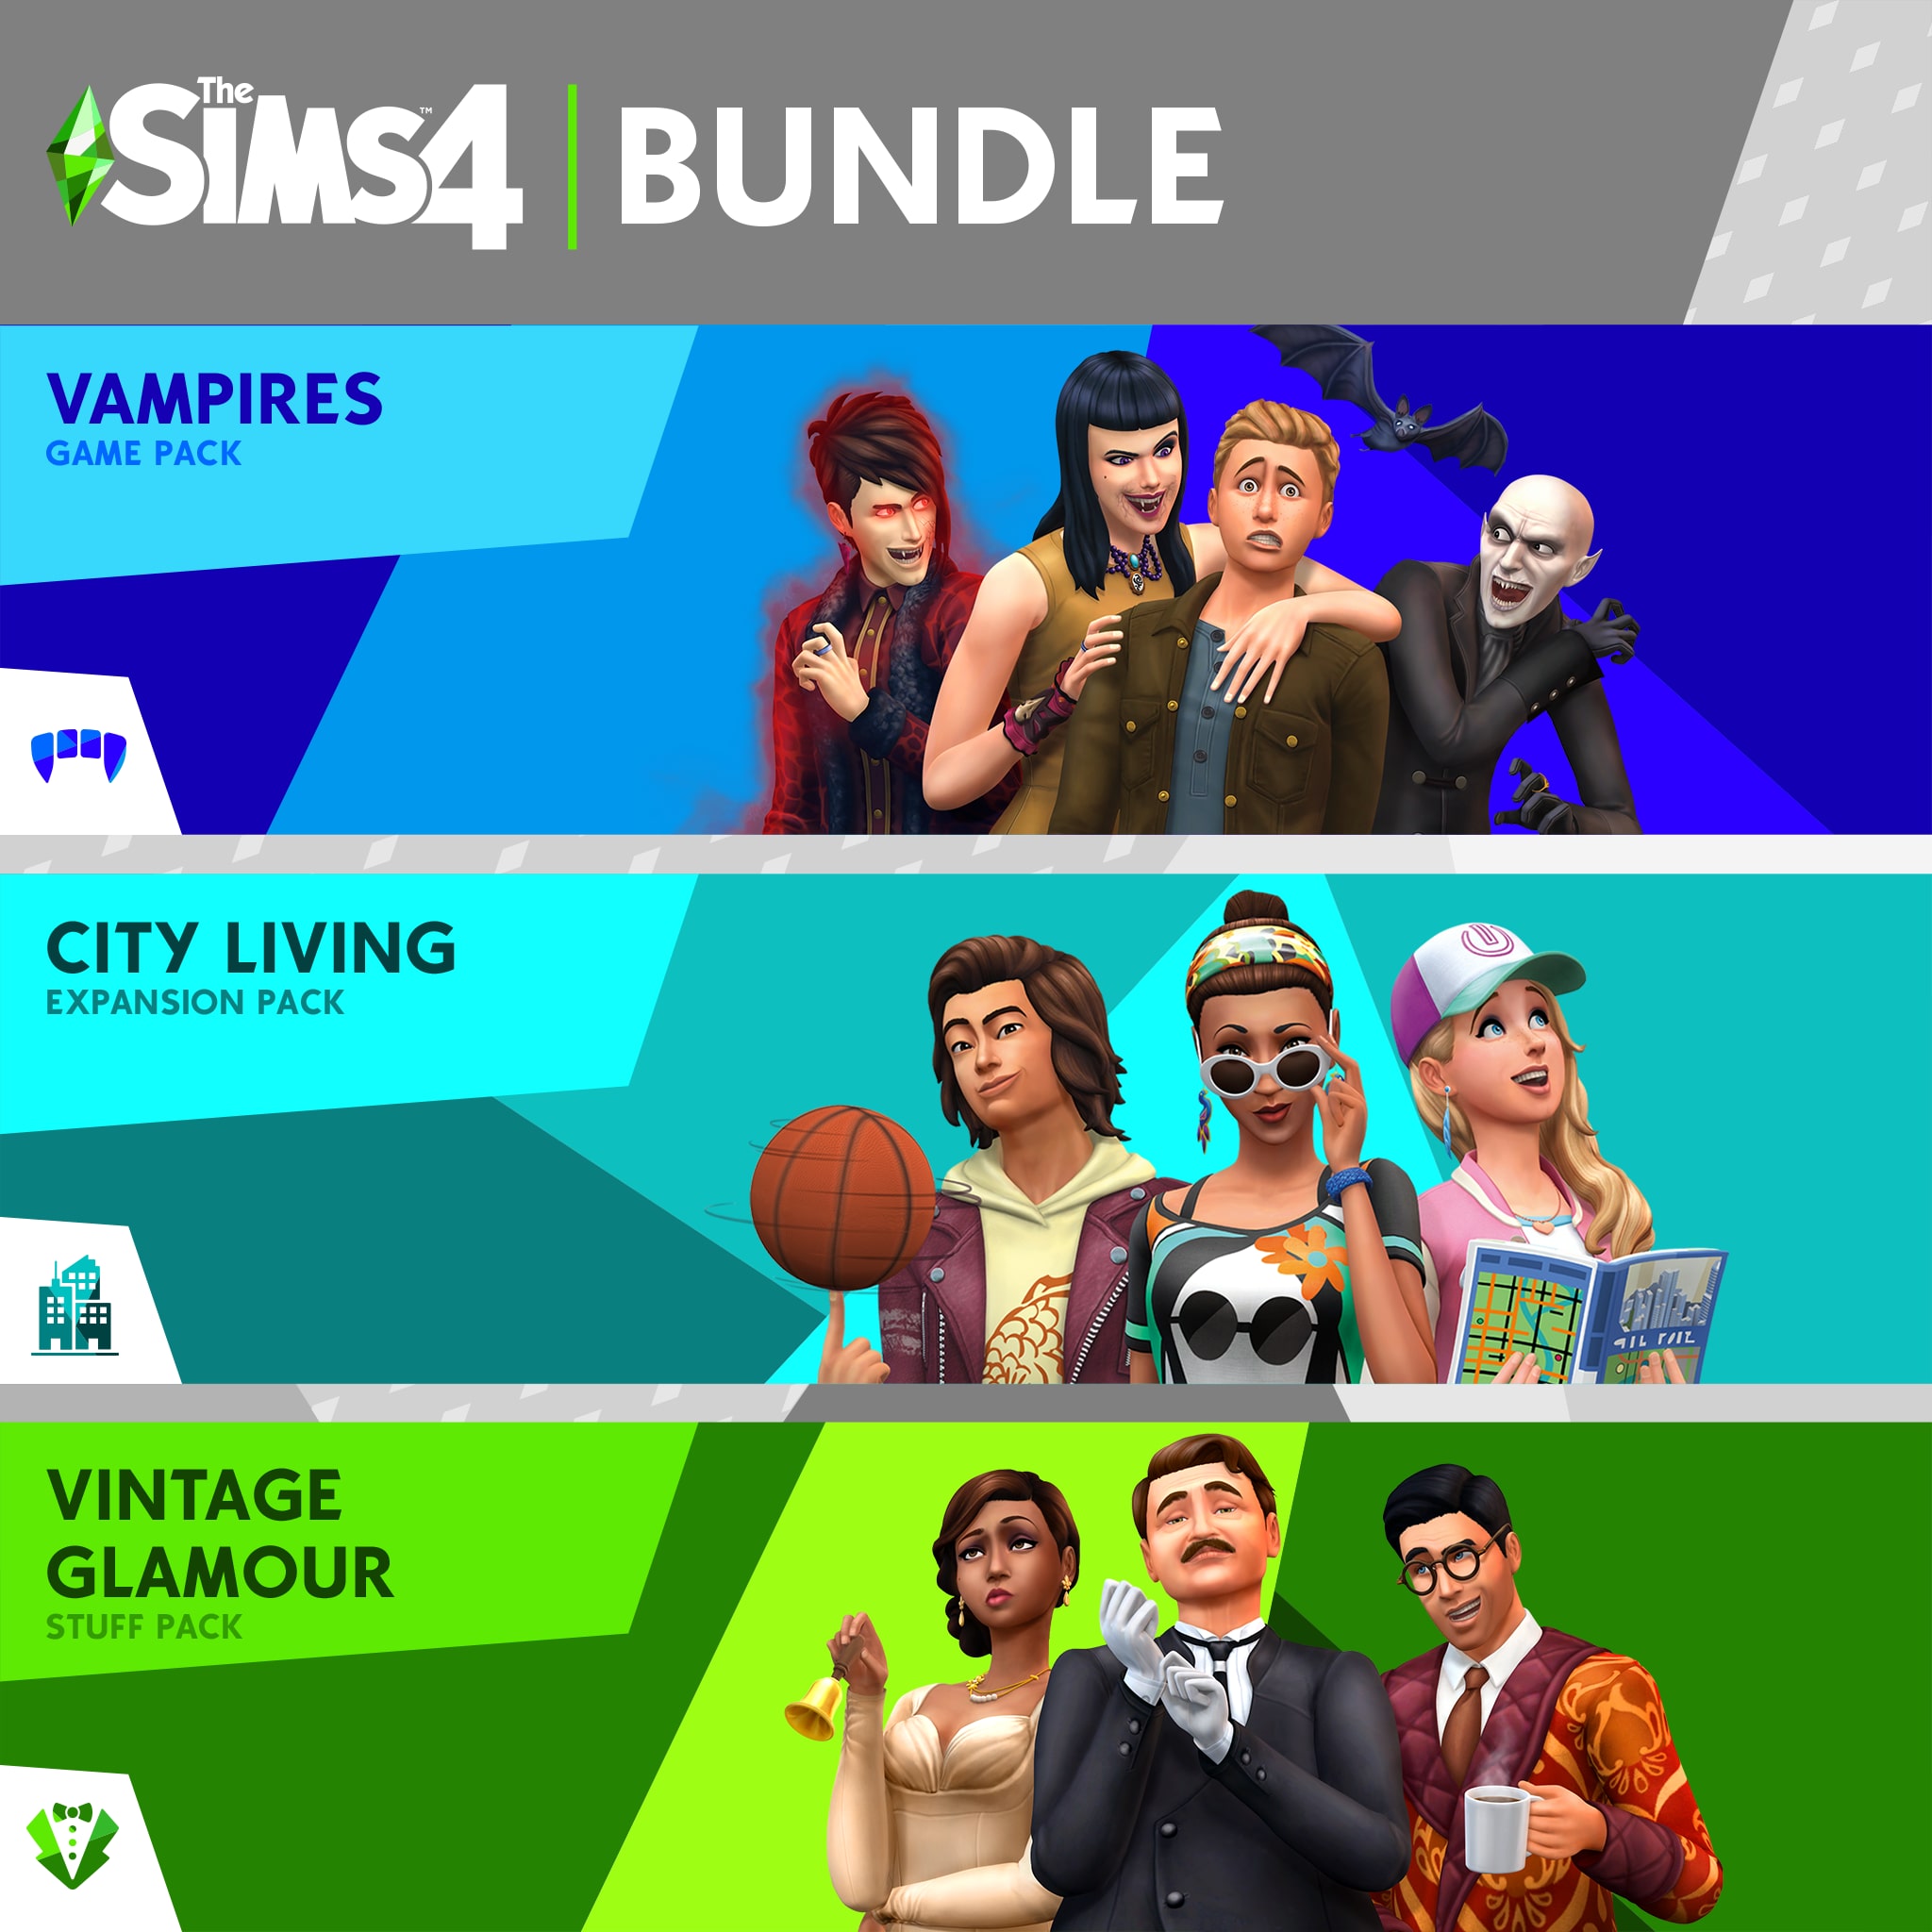 ps plus the sims 4